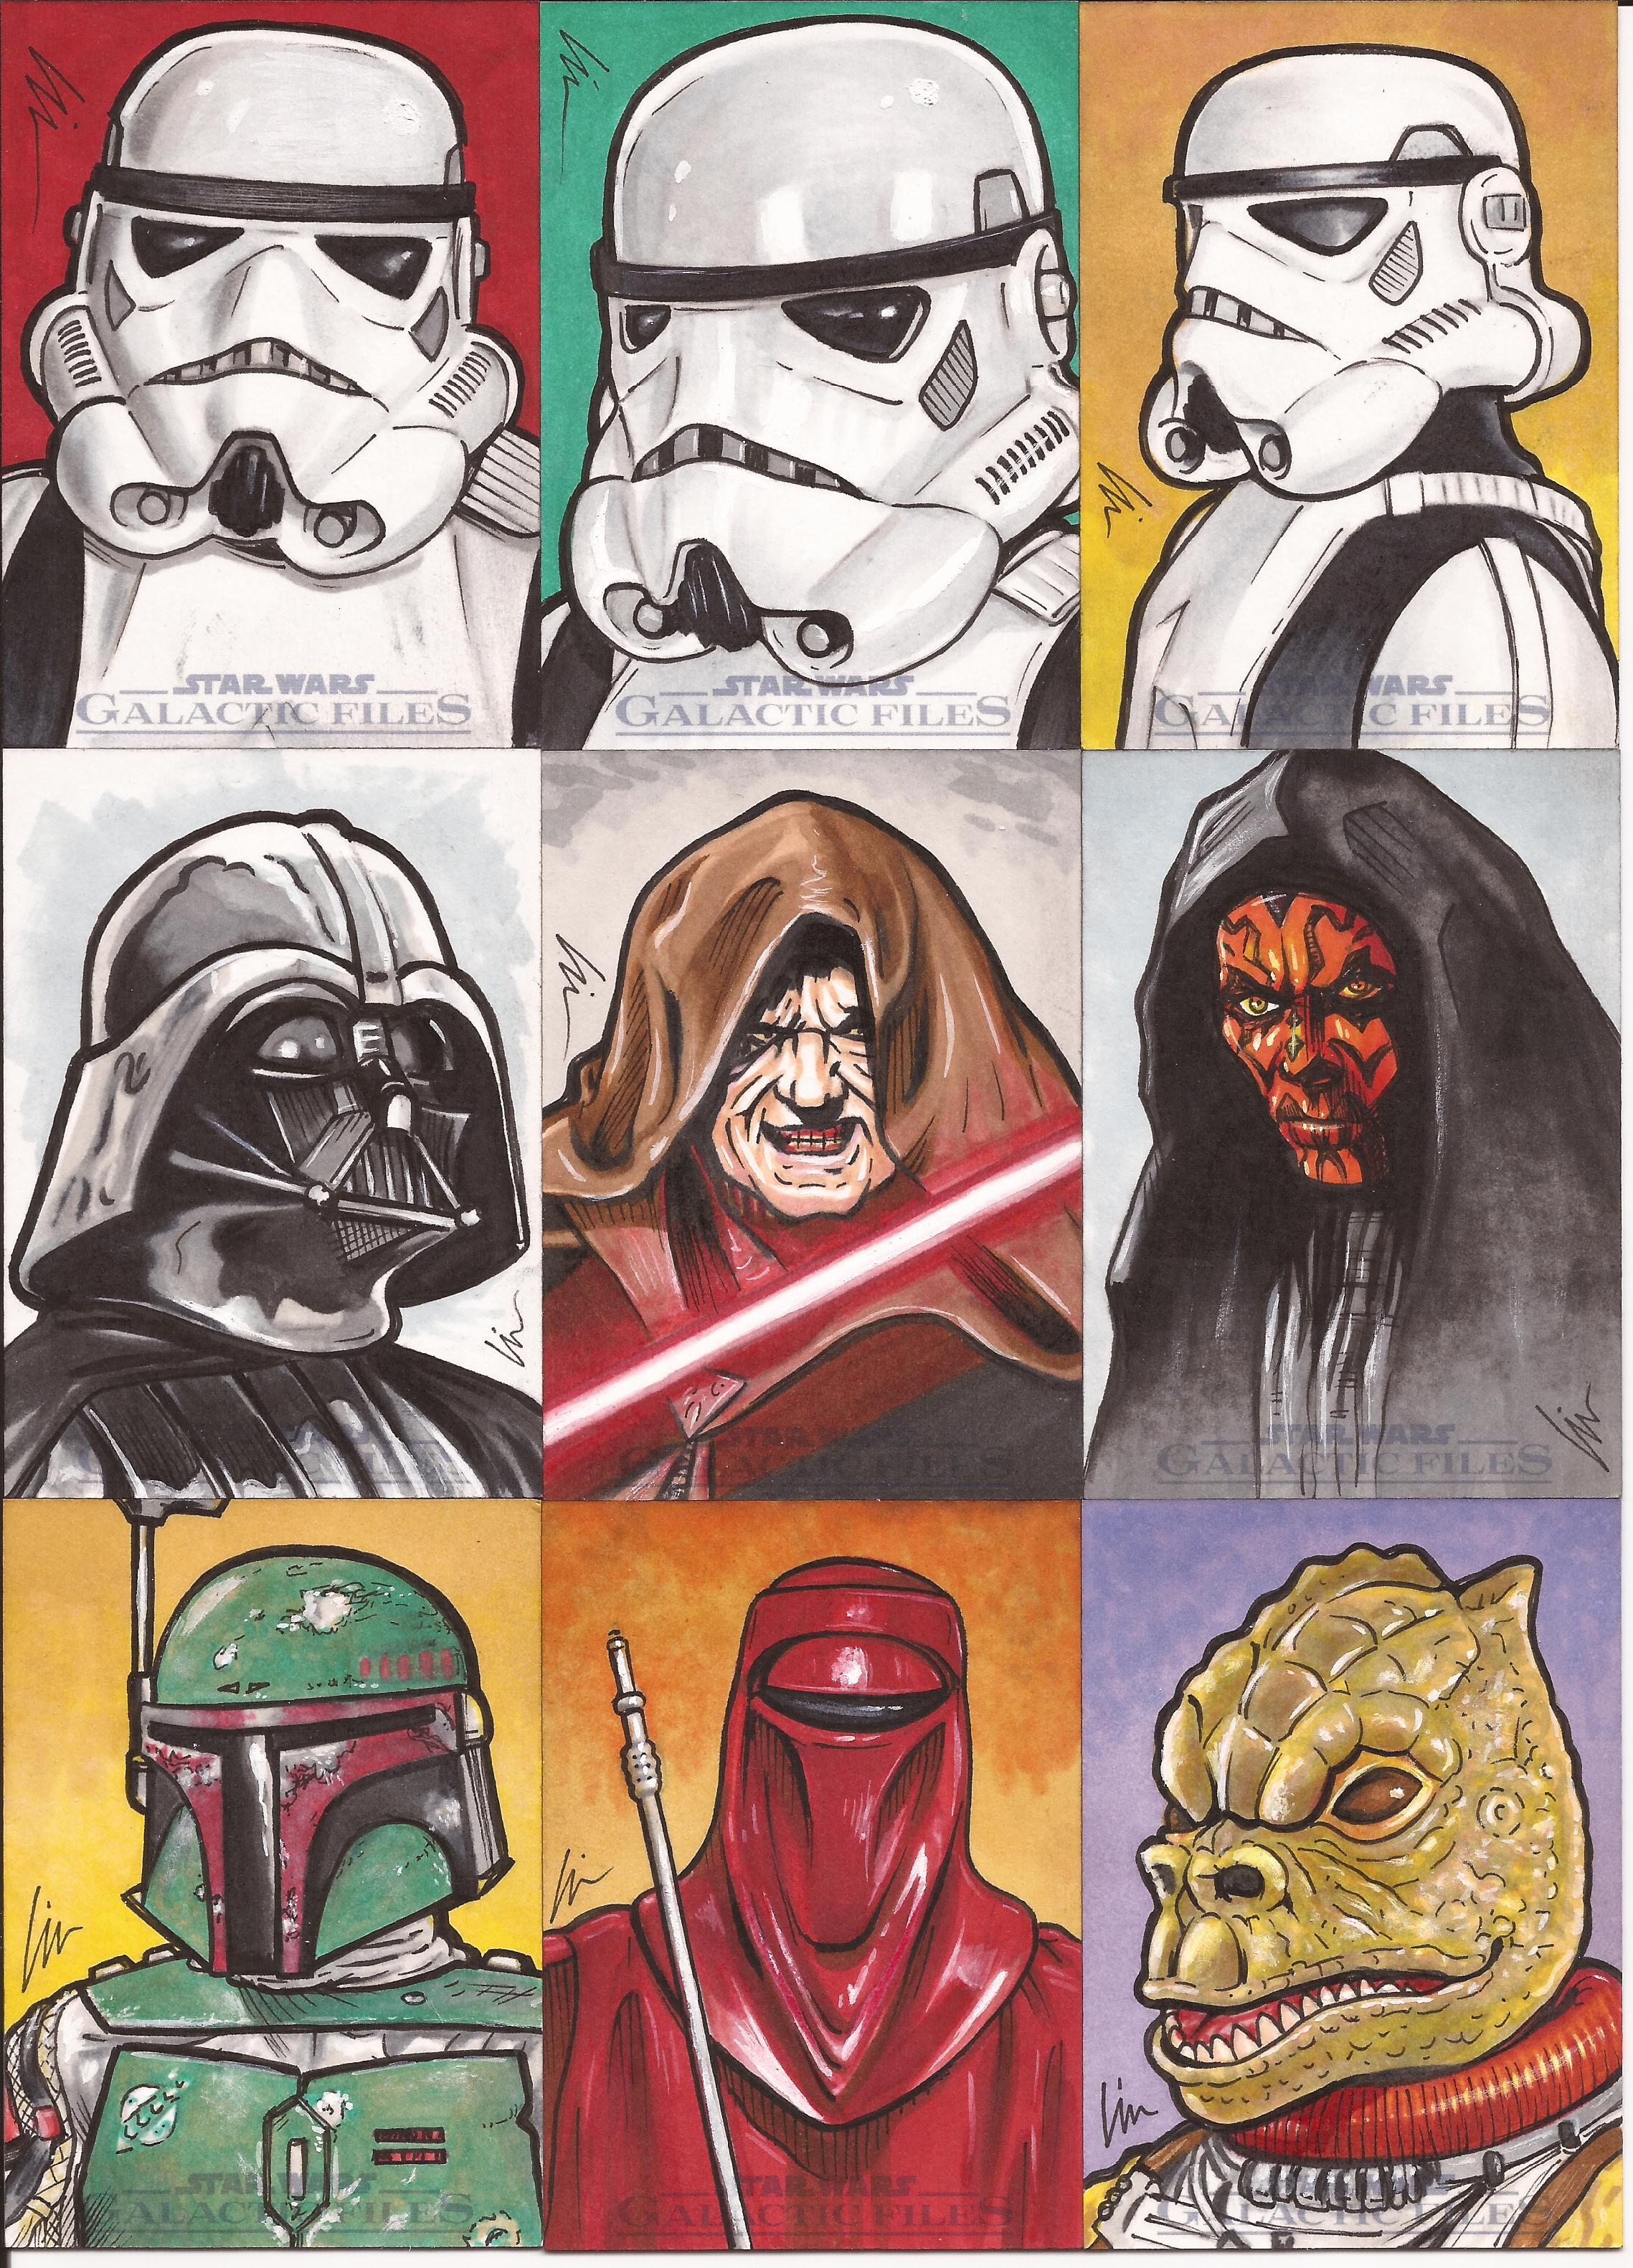 “The Palpy Bunch” – new Star Wars sketch cards approved